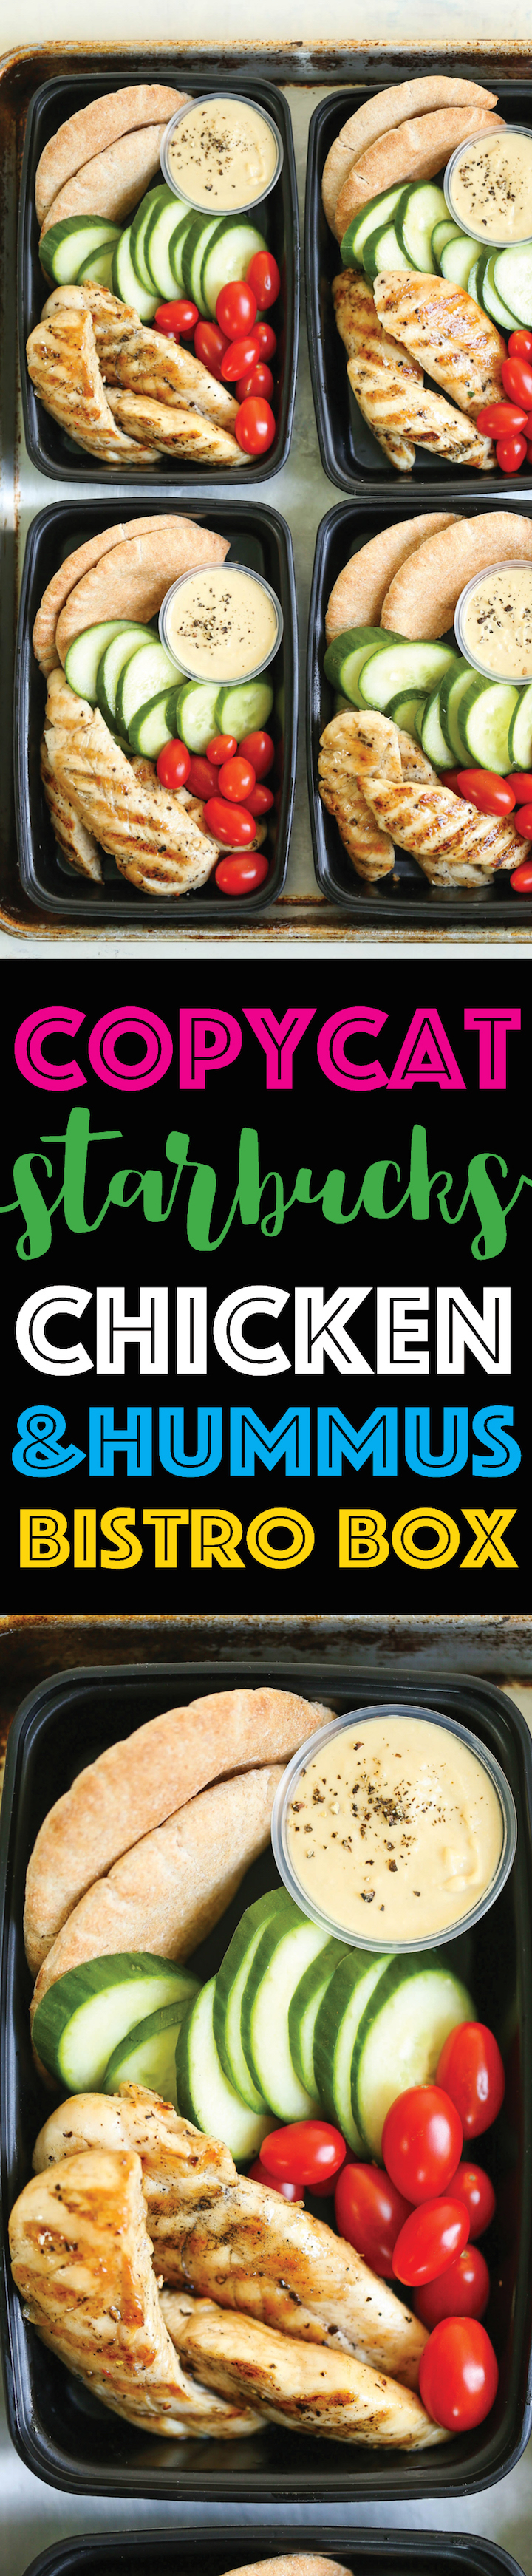 Copycat Starbucks Chicken and Hummus Bistro Box - Meal prep for the week ahead!!! Filled with hummus, chicken strips, cucumber, tomatoes and wheat pita.